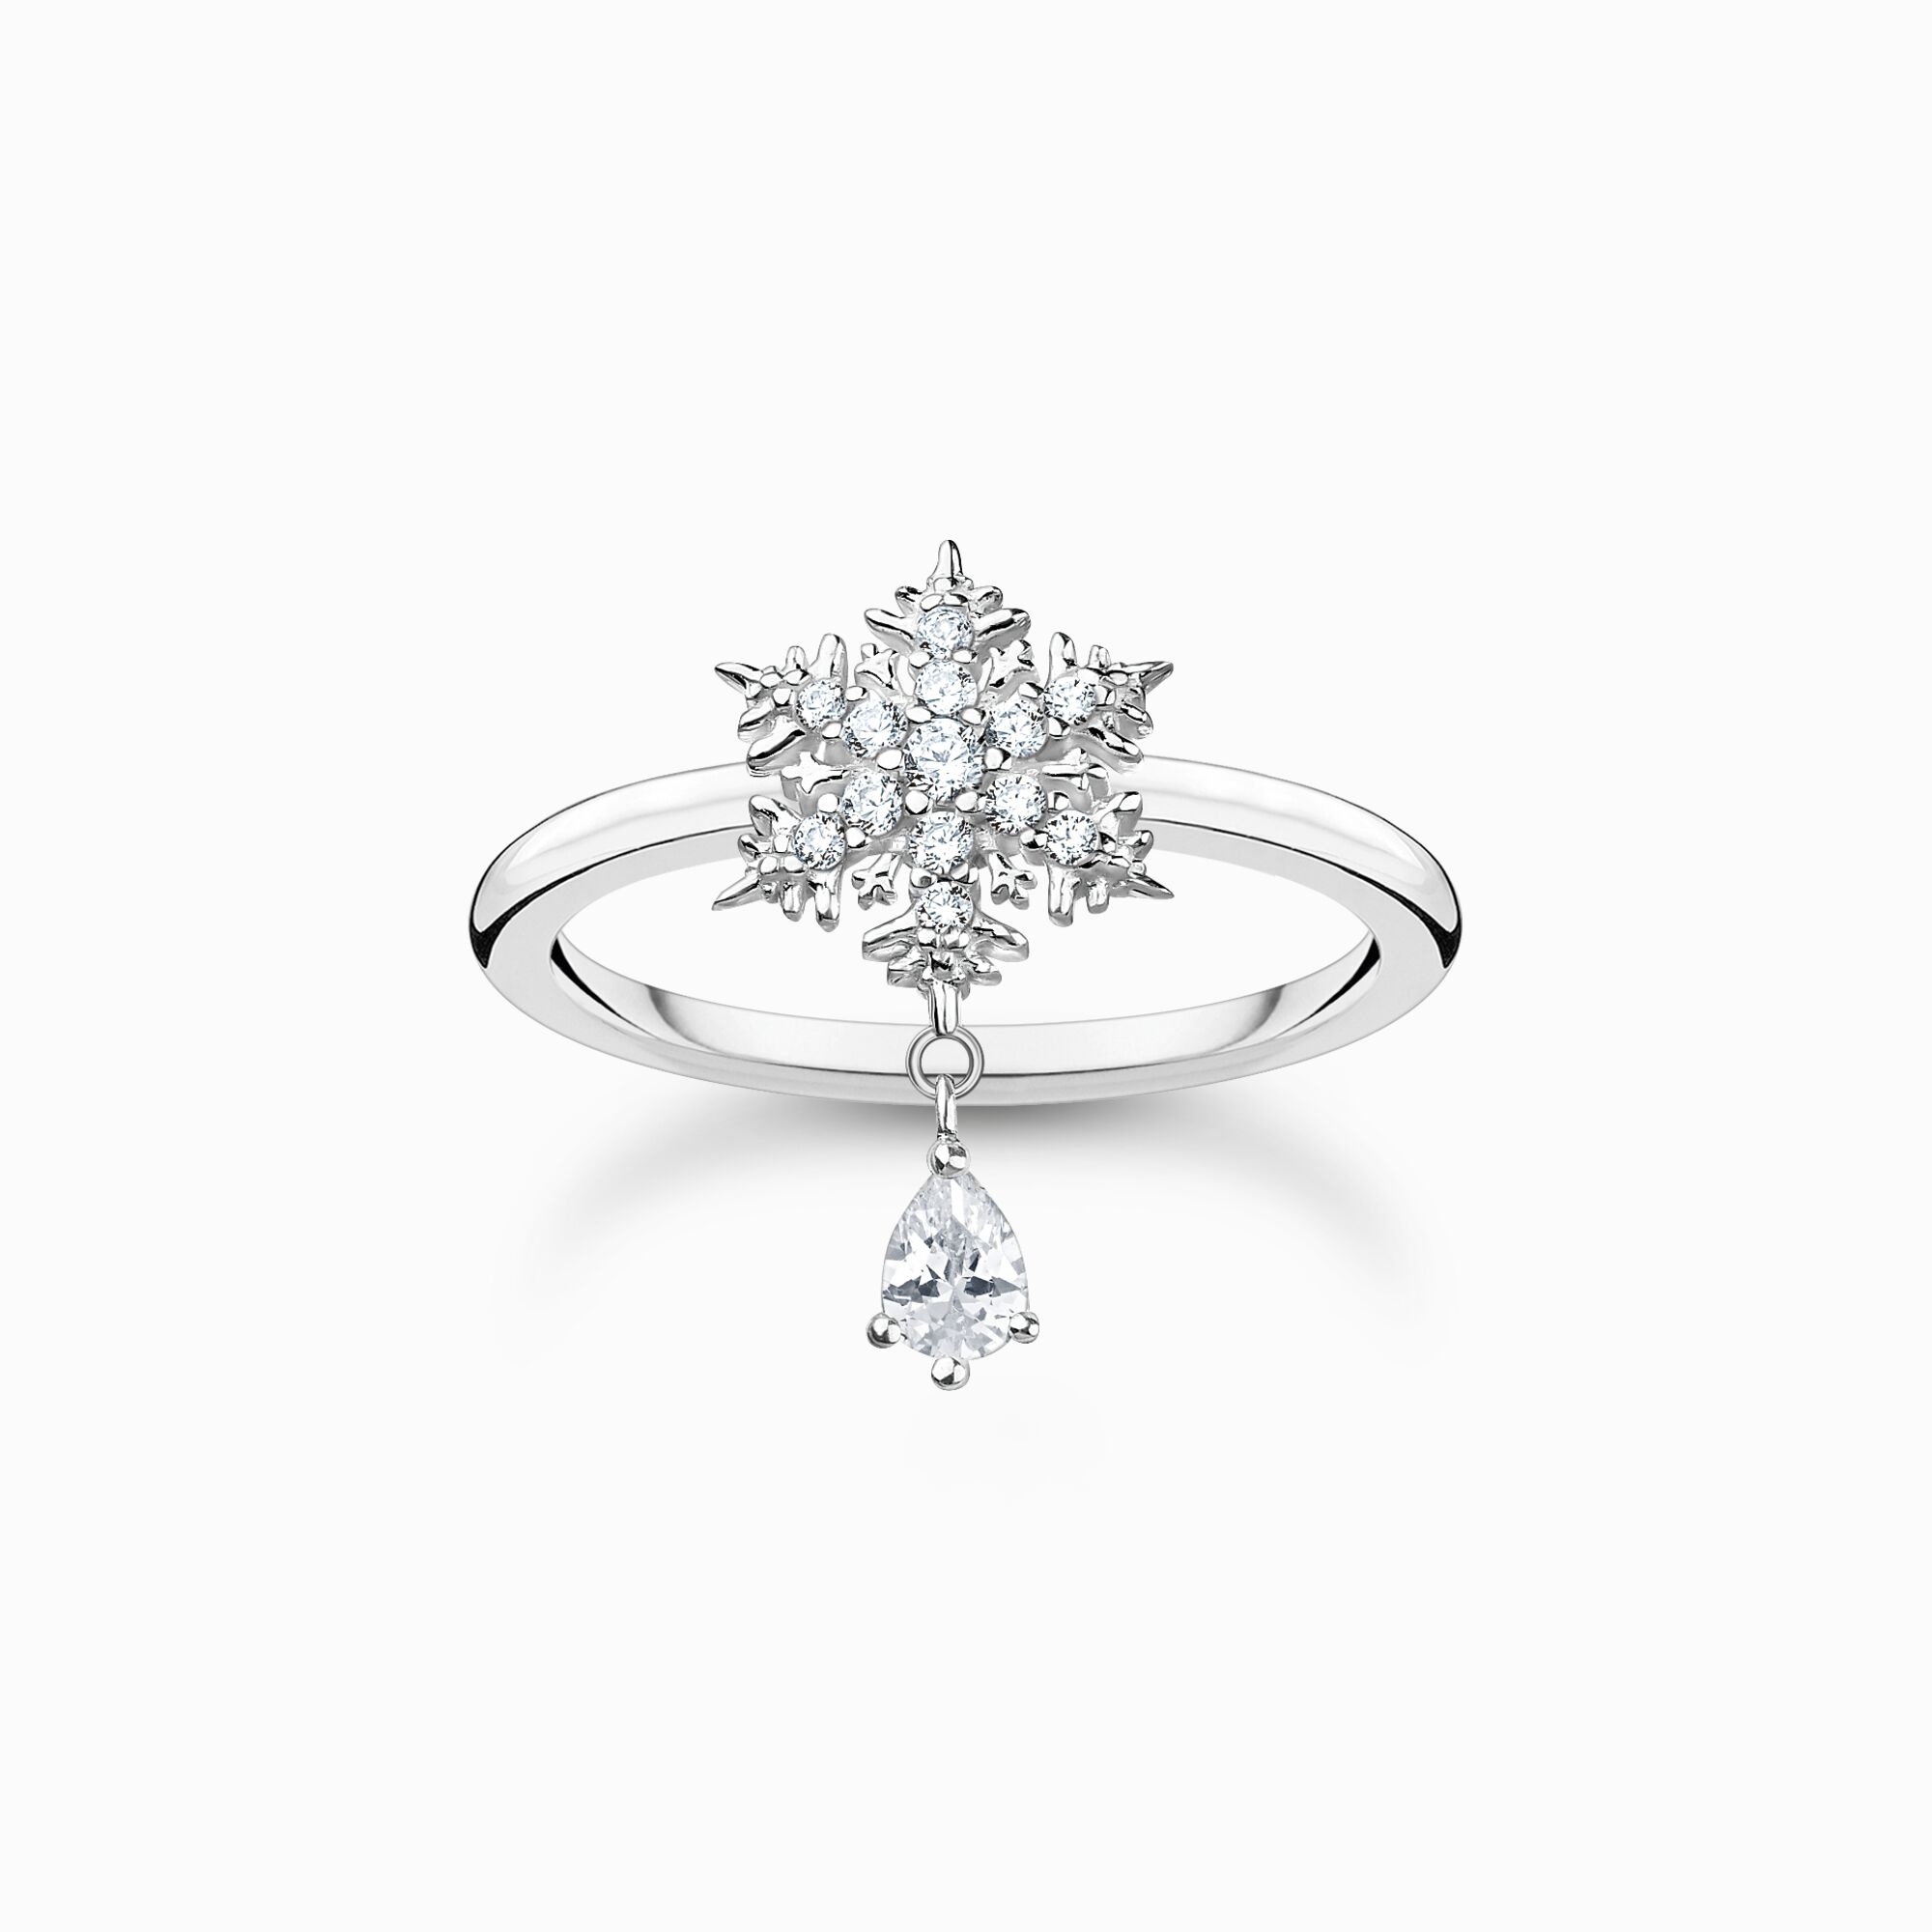 Ring snowflake with white stones silver from the Charming Collection collection in the THOMAS SABO online store